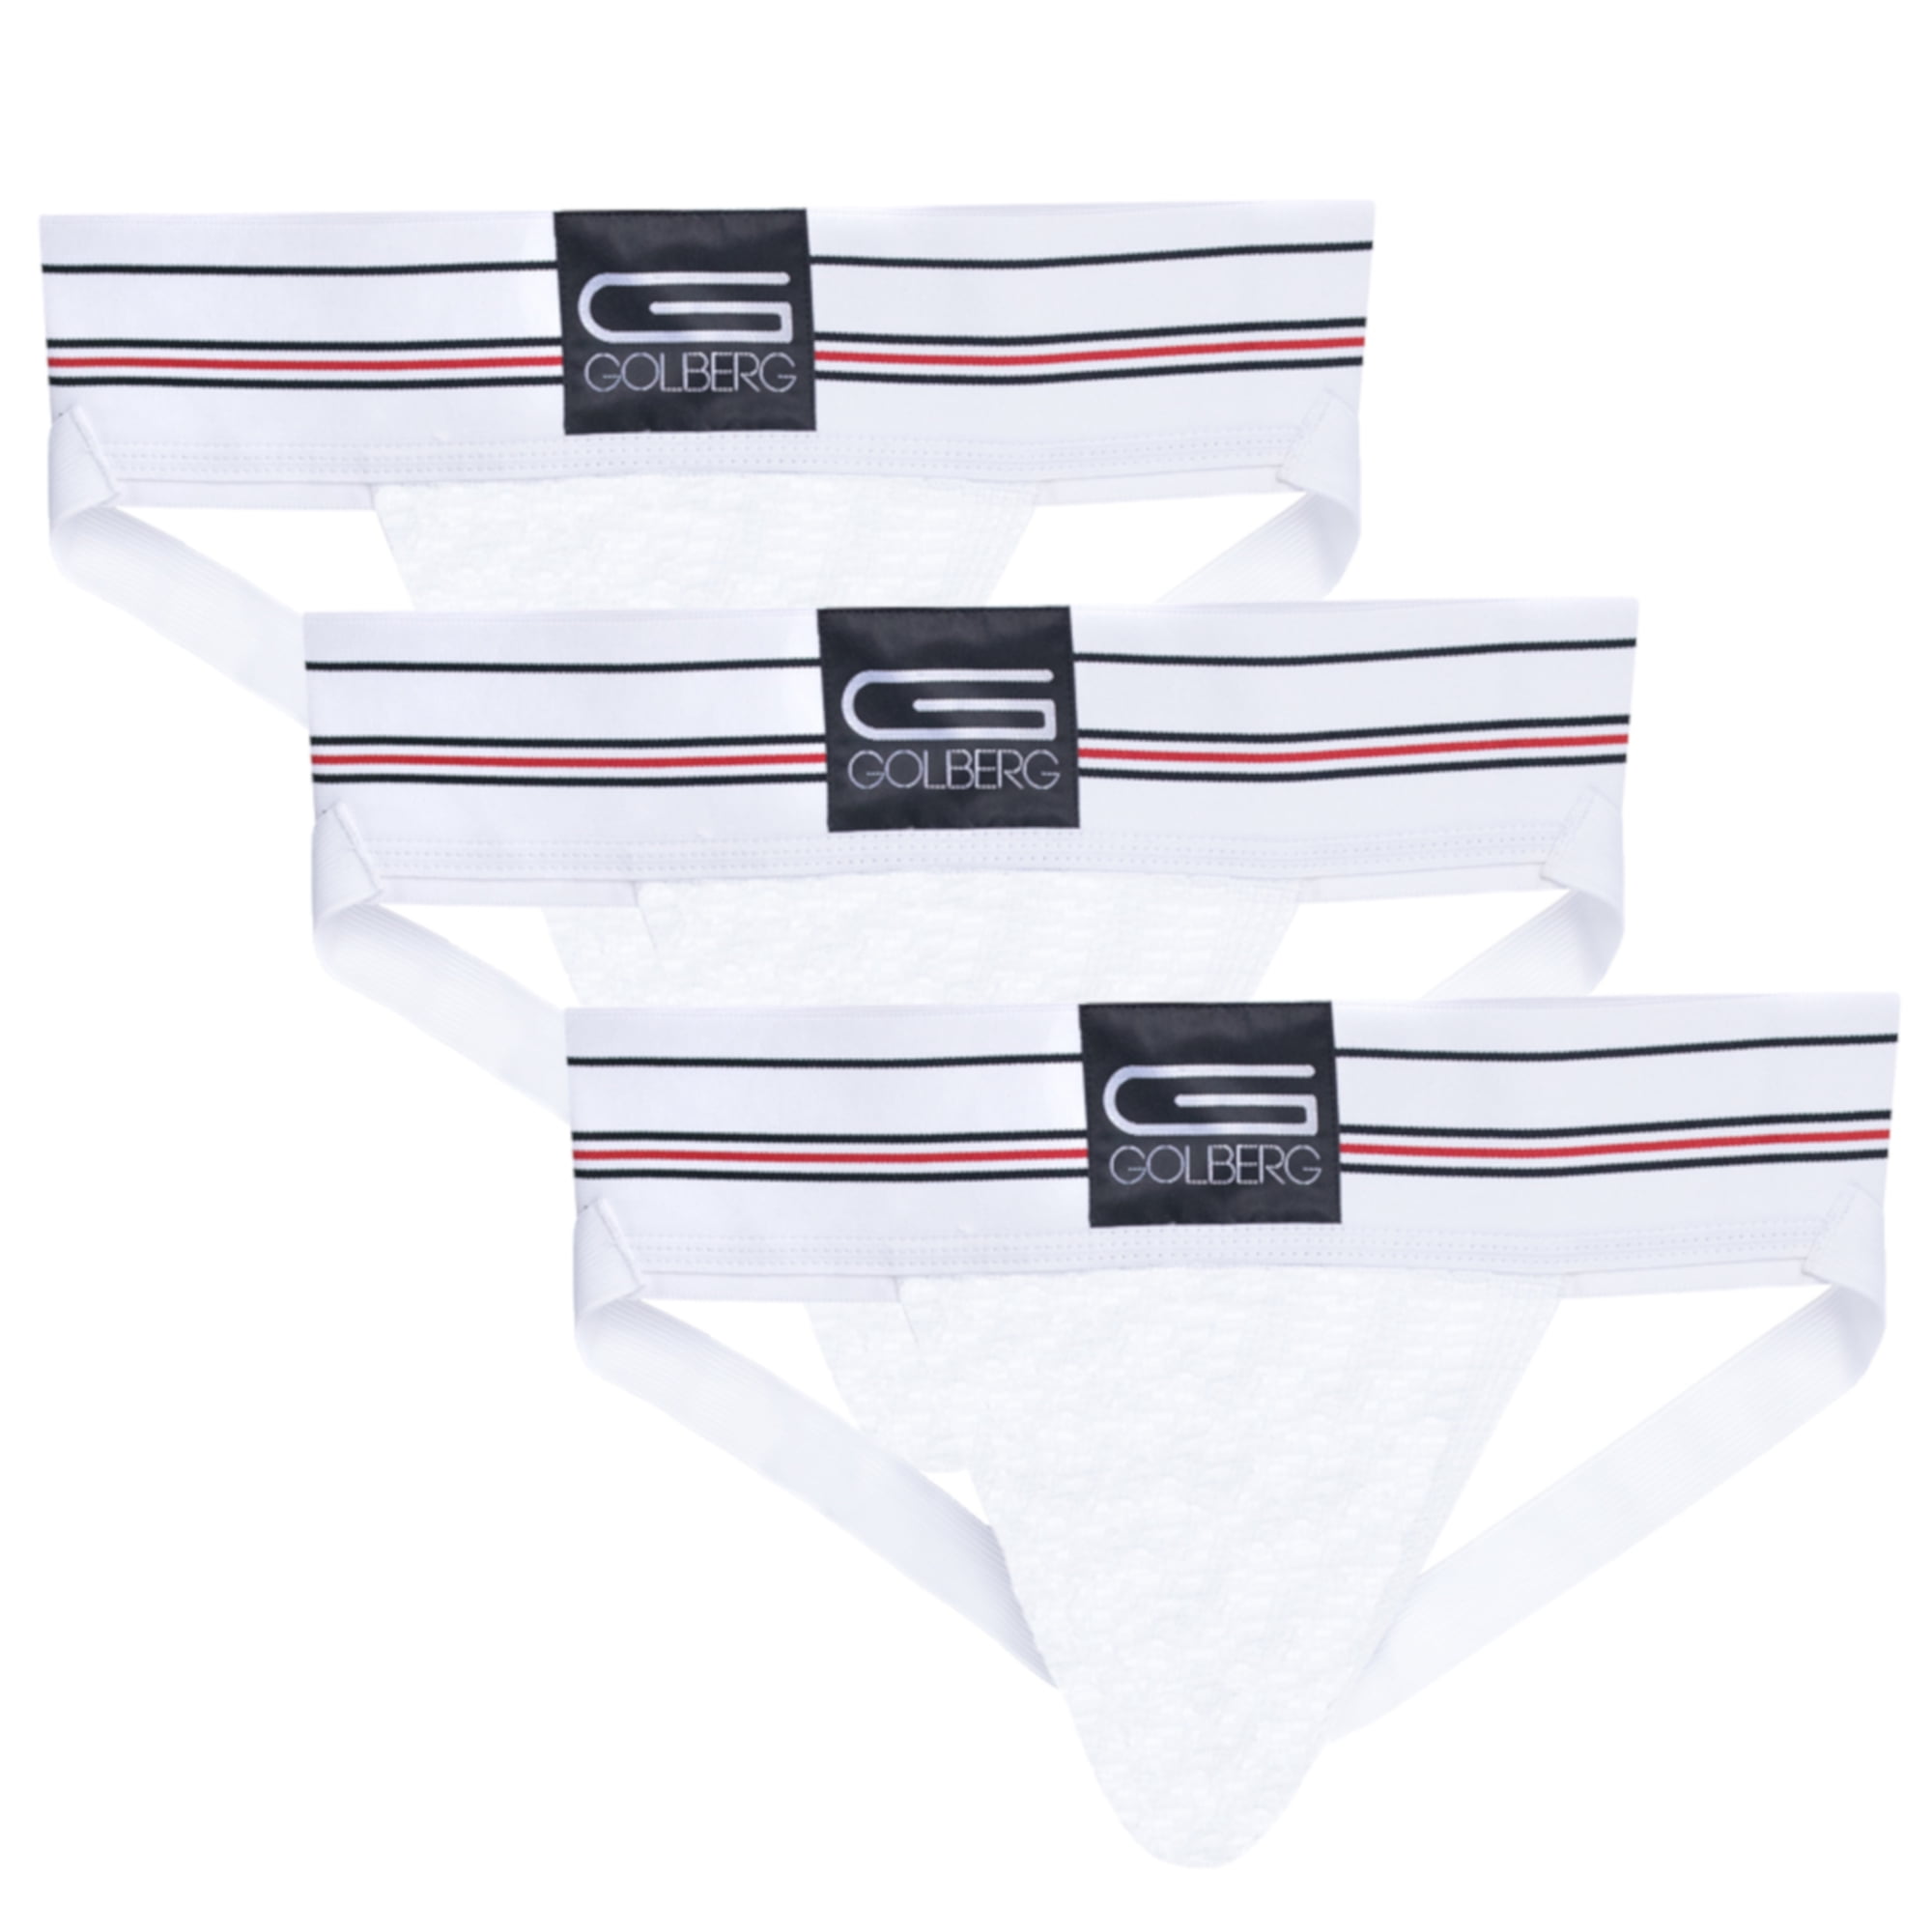 Naturally Contoured Waistband GOLBERG Athletic Supporter 3 Packs of Multiple Colors